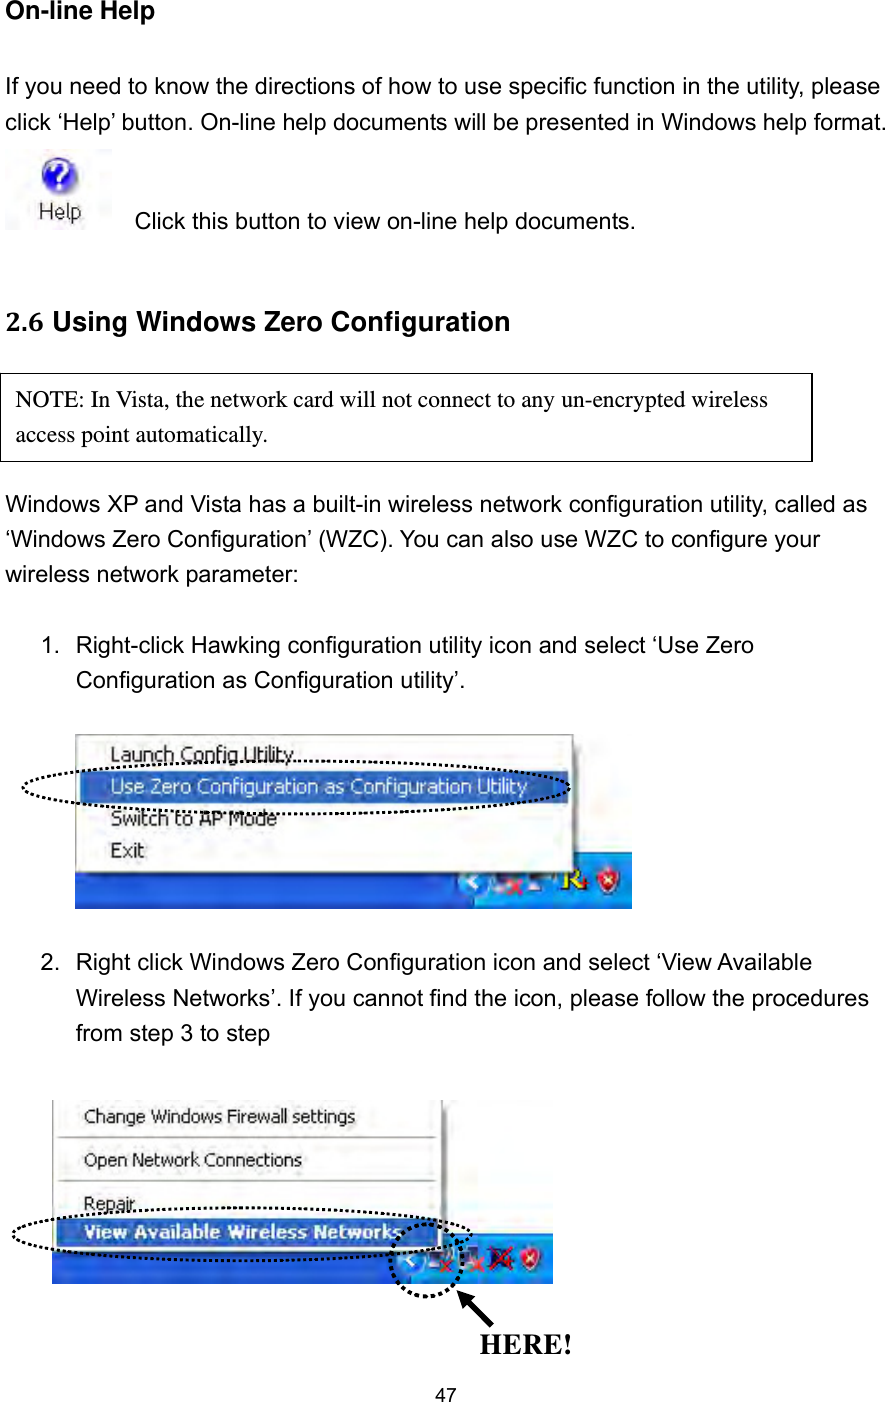  47 On-line Help  If you need to know the directions of how to use specific function in the utility, please click ‘Help’ button. On-line help documents will be presented in Windows help format.     Click this button to view on-line help documents.  2.6 Using Windows Zero Configuration     Windows XP and Vista has a built-in wireless network configuration utility, called as ‘Windows Zero Configuration’ (WZC). You can also use WZC to configure your wireless network parameter:  1.  Right-click Hawking configuration utility icon and select ‘Use Zero Configuration as Configuration utility’.    2.  Right click Windows Zero Configuration icon and select ‘View Available Wireless Networks’. If you cannot find the icon, please follow the procedures from step 3 to step       HERE! NOTE: In Vista, the network card will not connect to any un-encrypted wireless access point automatically. 